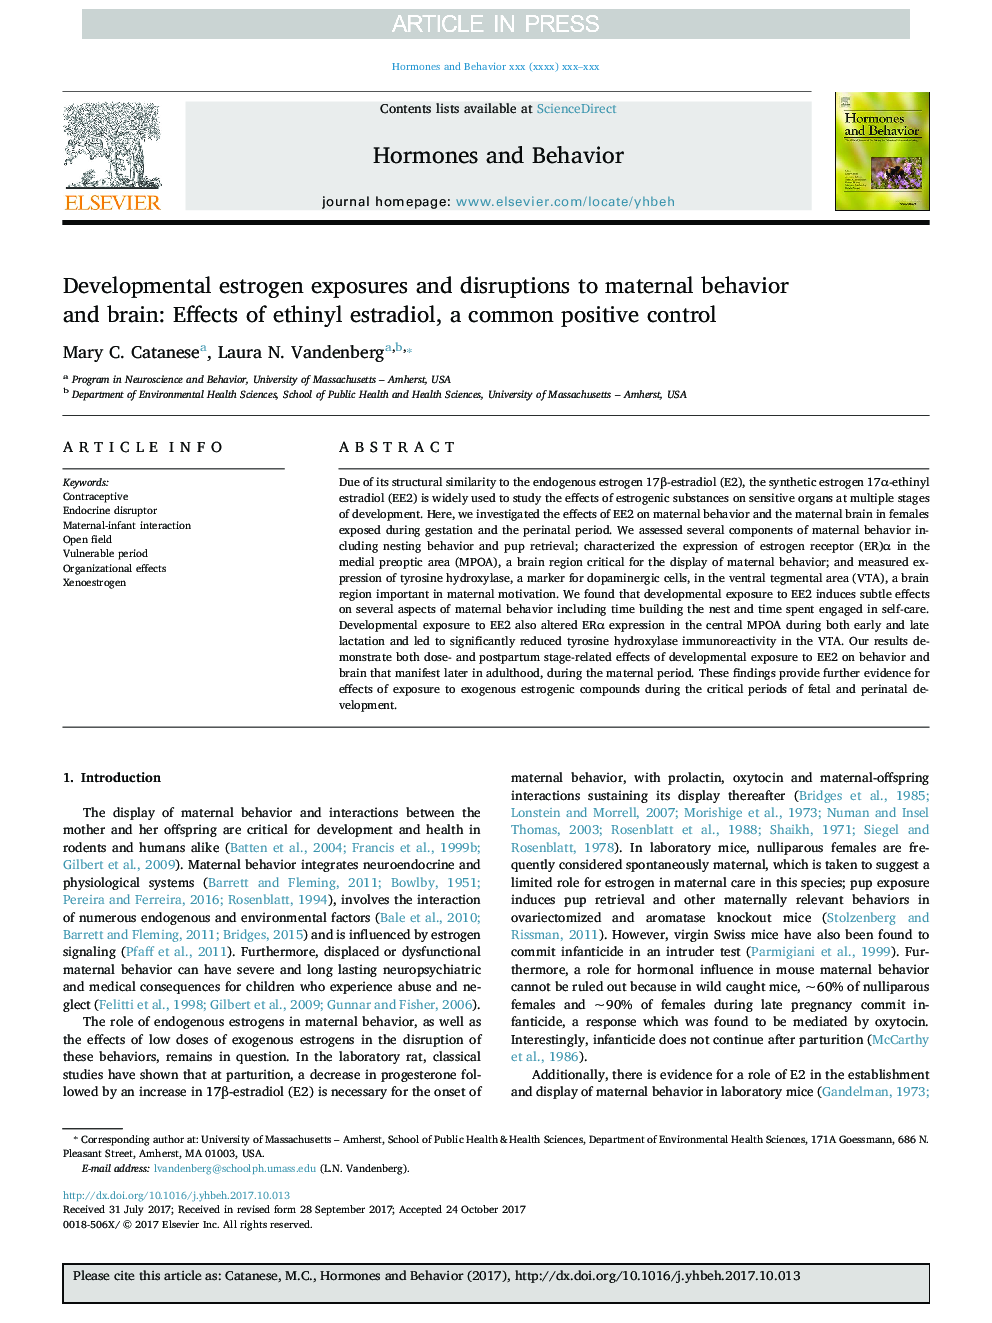 Developmental estrogen exposures and disruptions to maternal behavior and brain: Effects of ethinyl estradiol, a common positive control